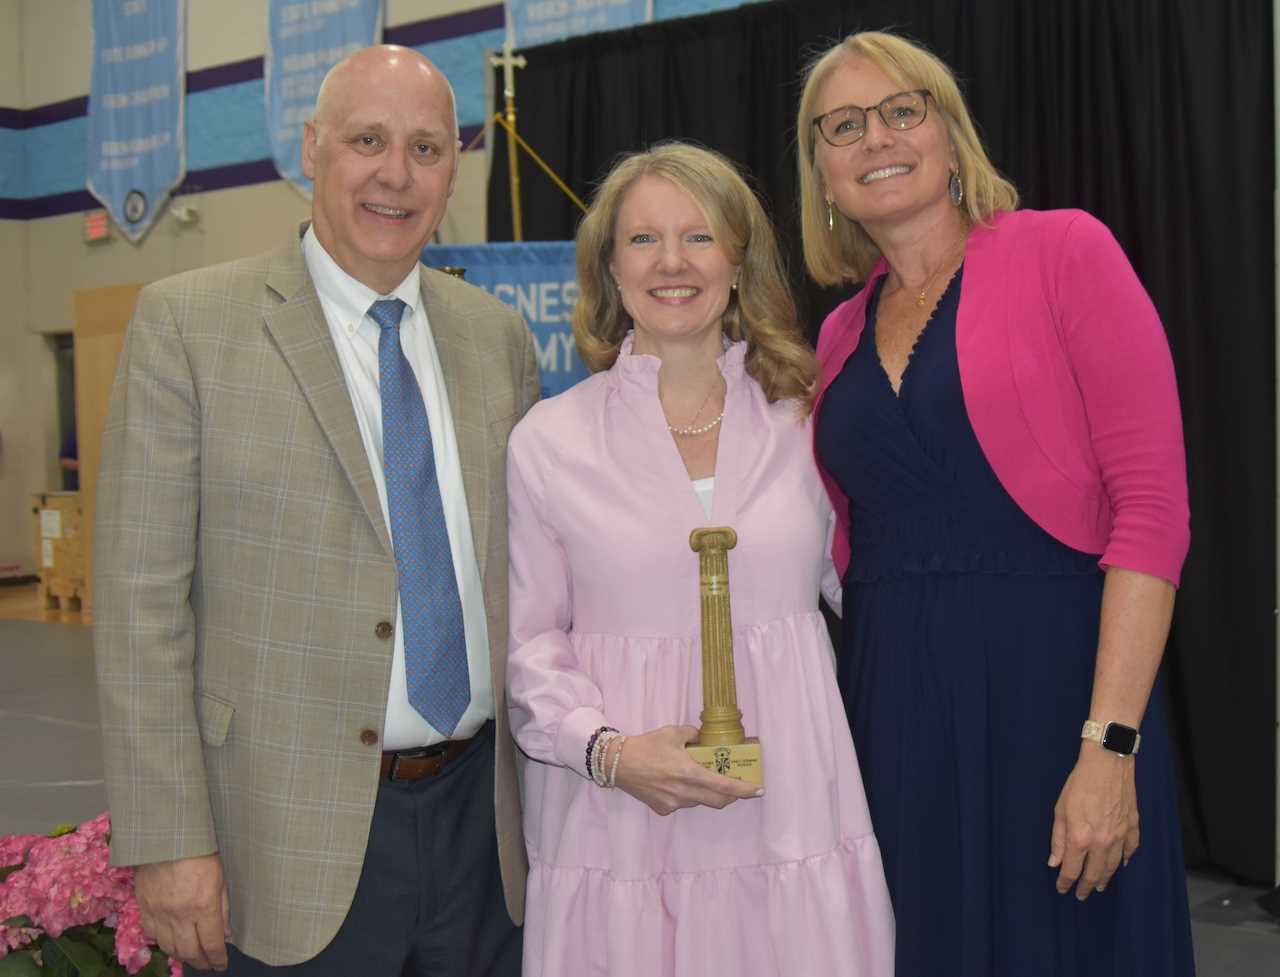 St. Agnes 4th Grade Teacher Katie Marking Honored as Outstanding Educator 